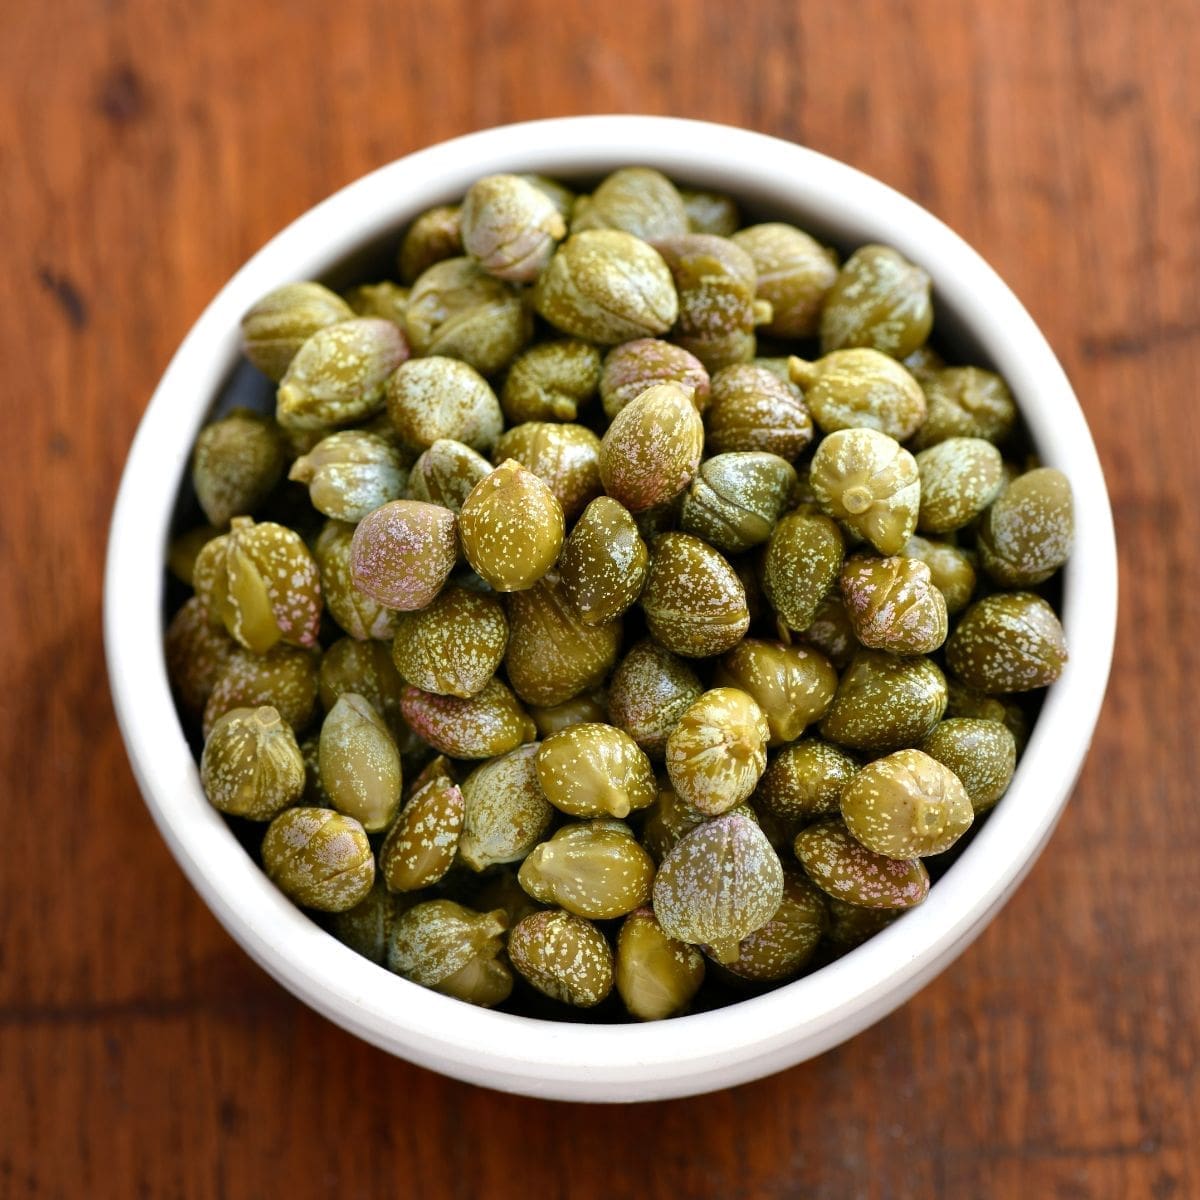 7 substitutes for capers that are making the rounds now!